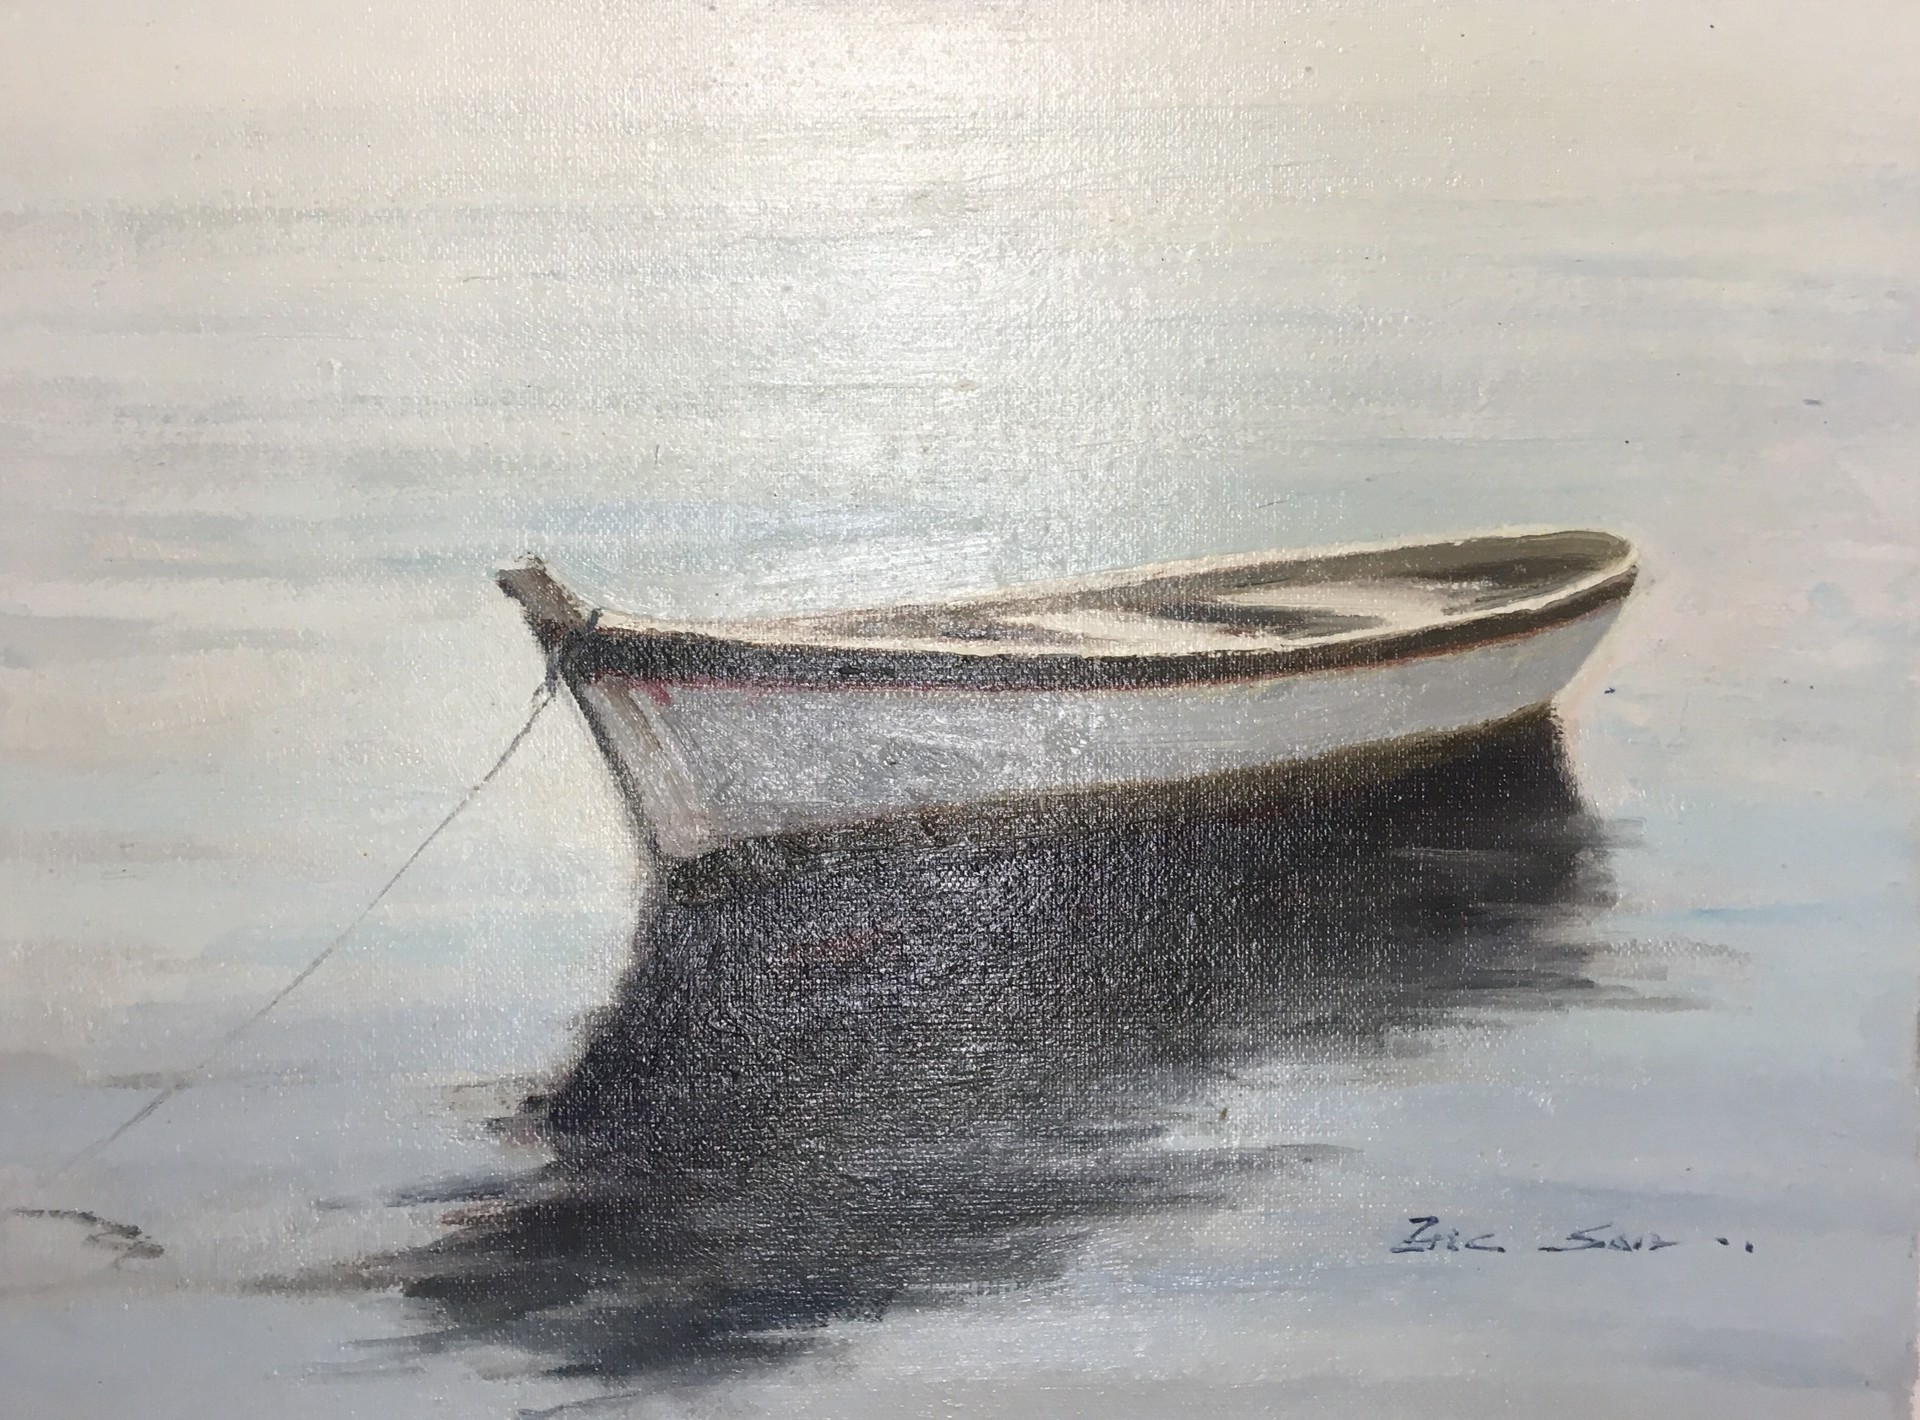 WHITE BOAT WITH BROWN TRIM by ERIC SUN